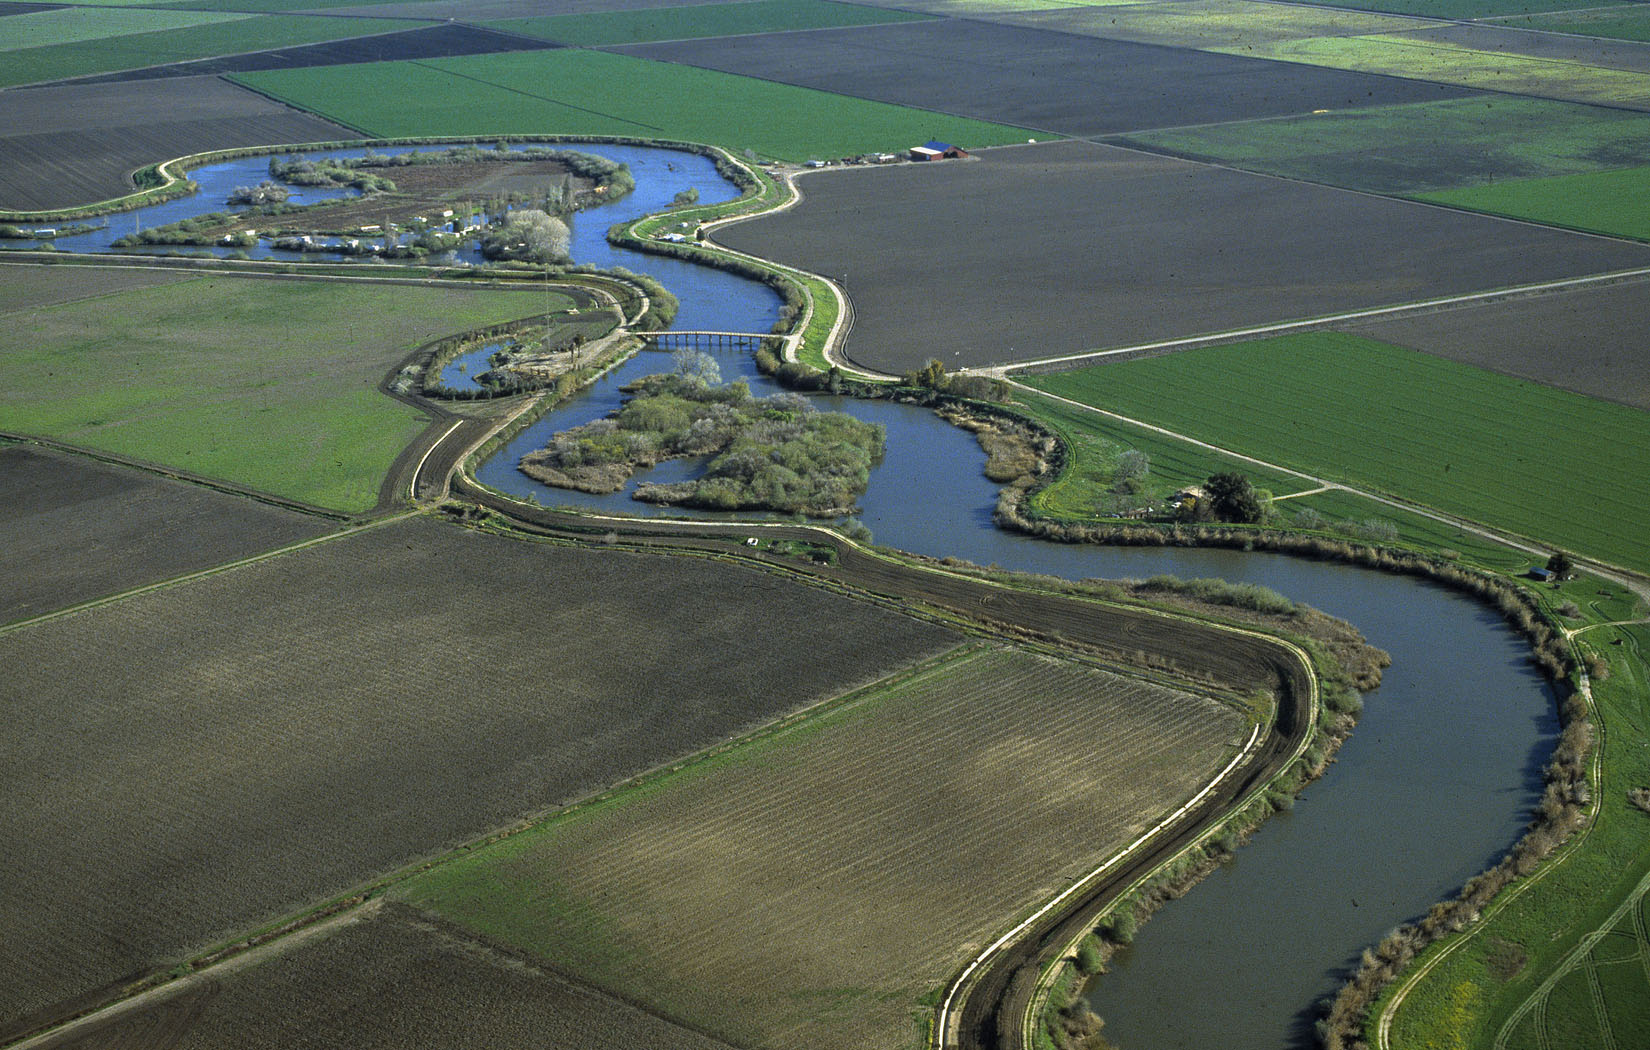 An aerial shot of a serpentine-like river with farmland in various shades of green surrounding it.